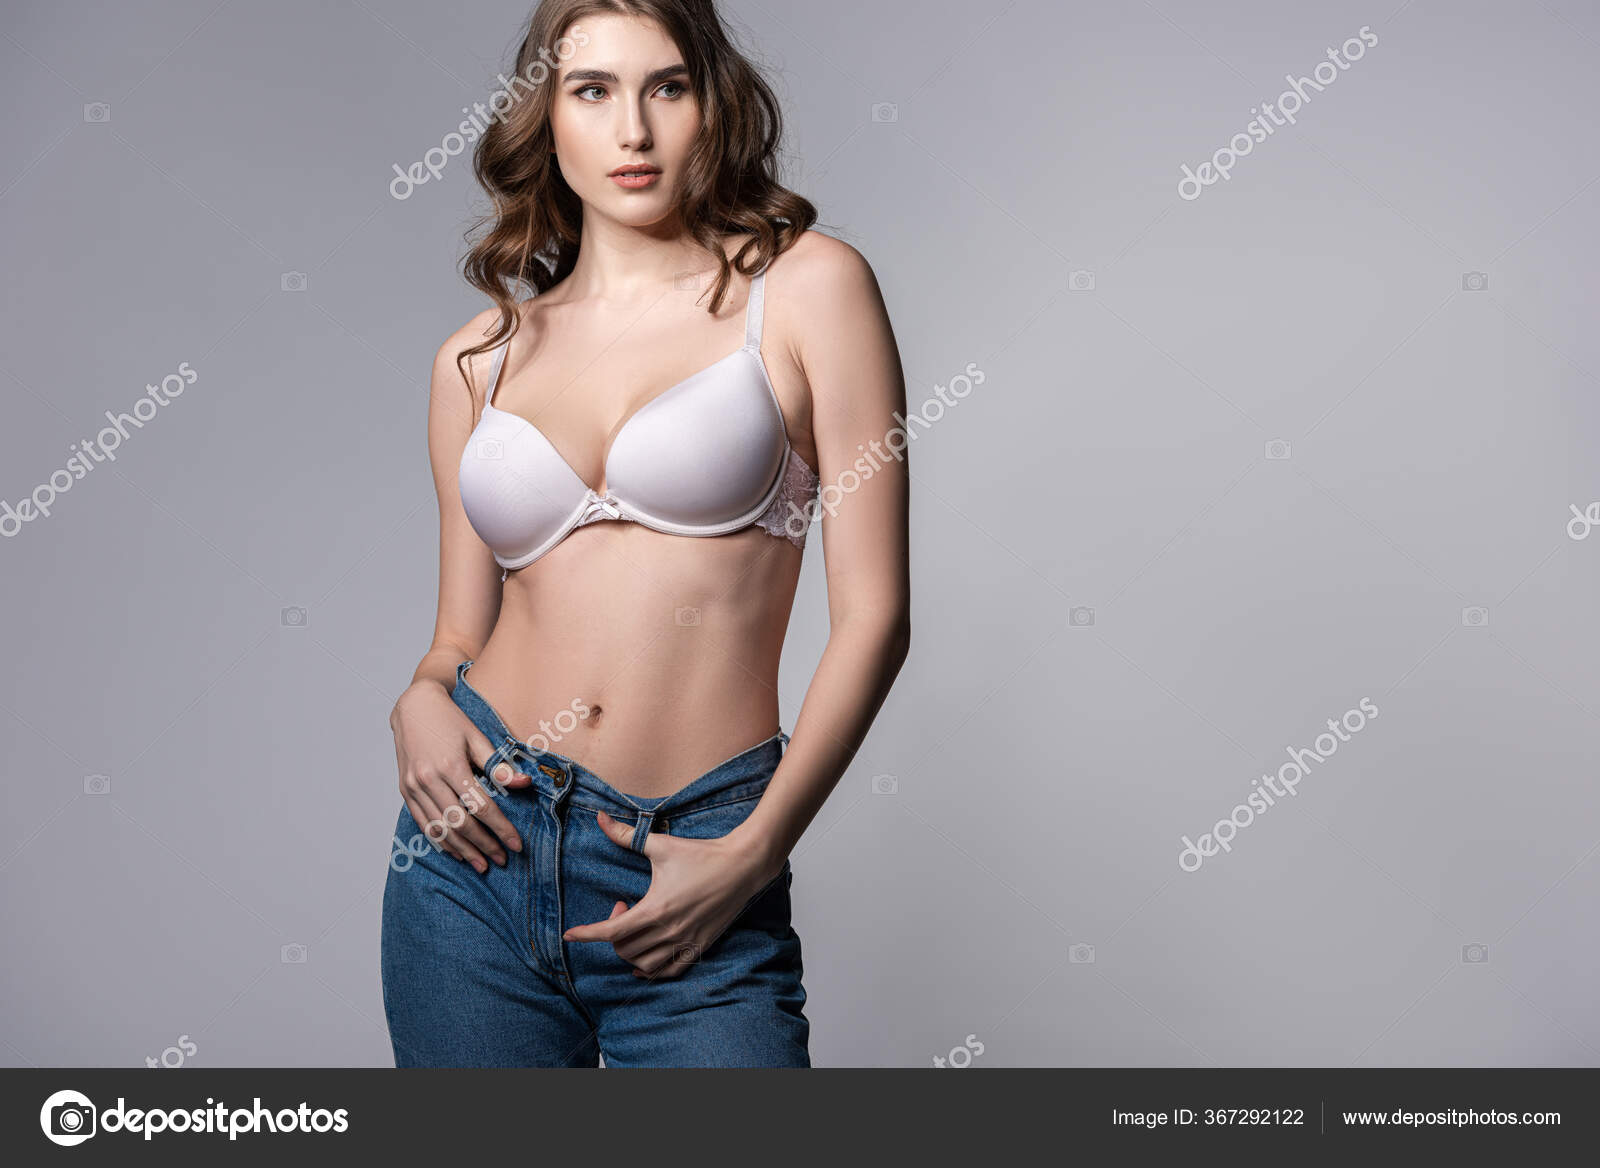 A beautiful young woman standing in a bra with big boobs holding